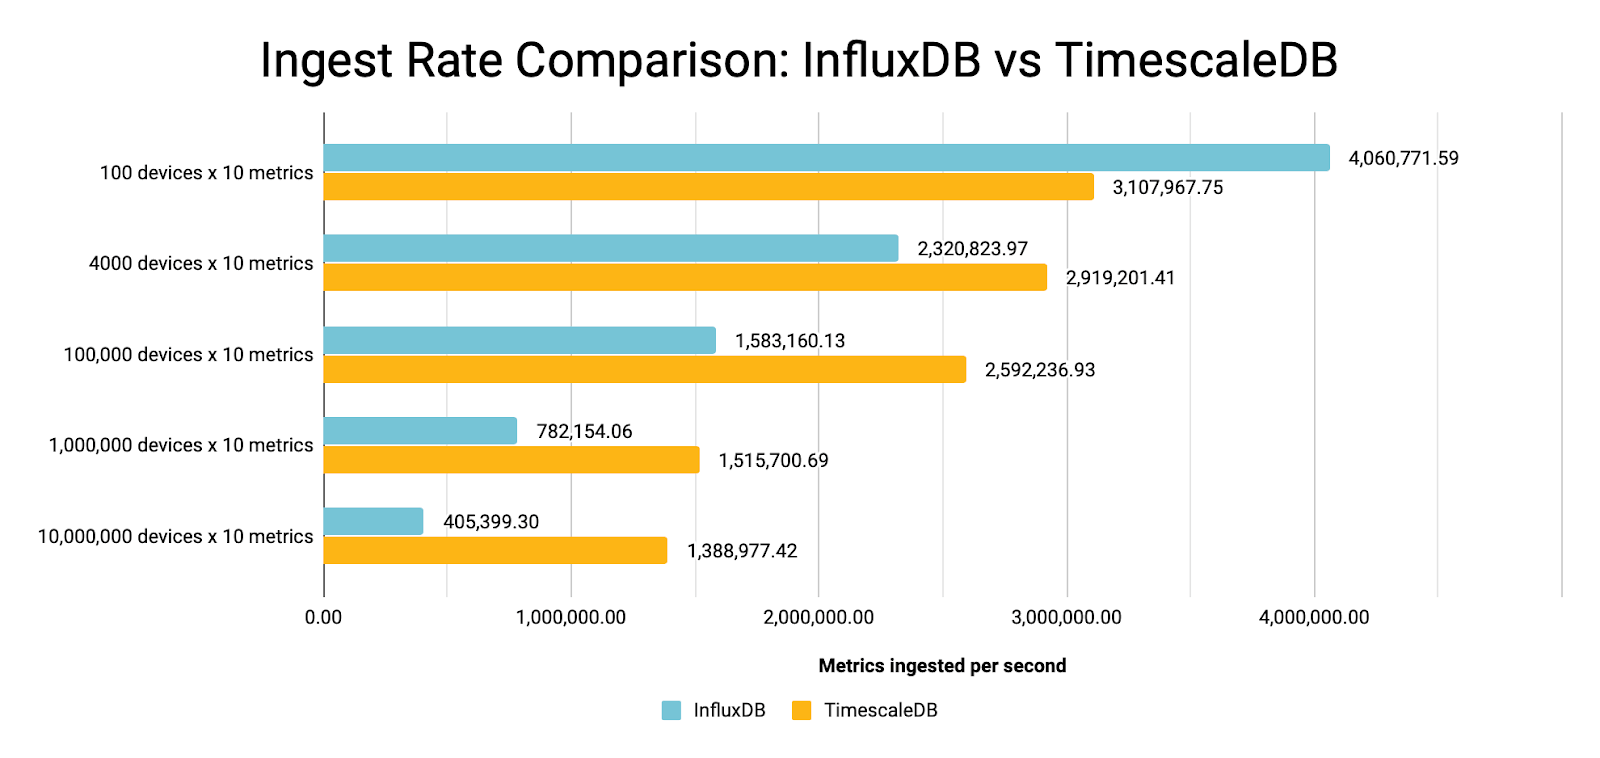 Chart showing metrics ingested per second between InfluxDB and Timescale. Timescale exhibits better performance